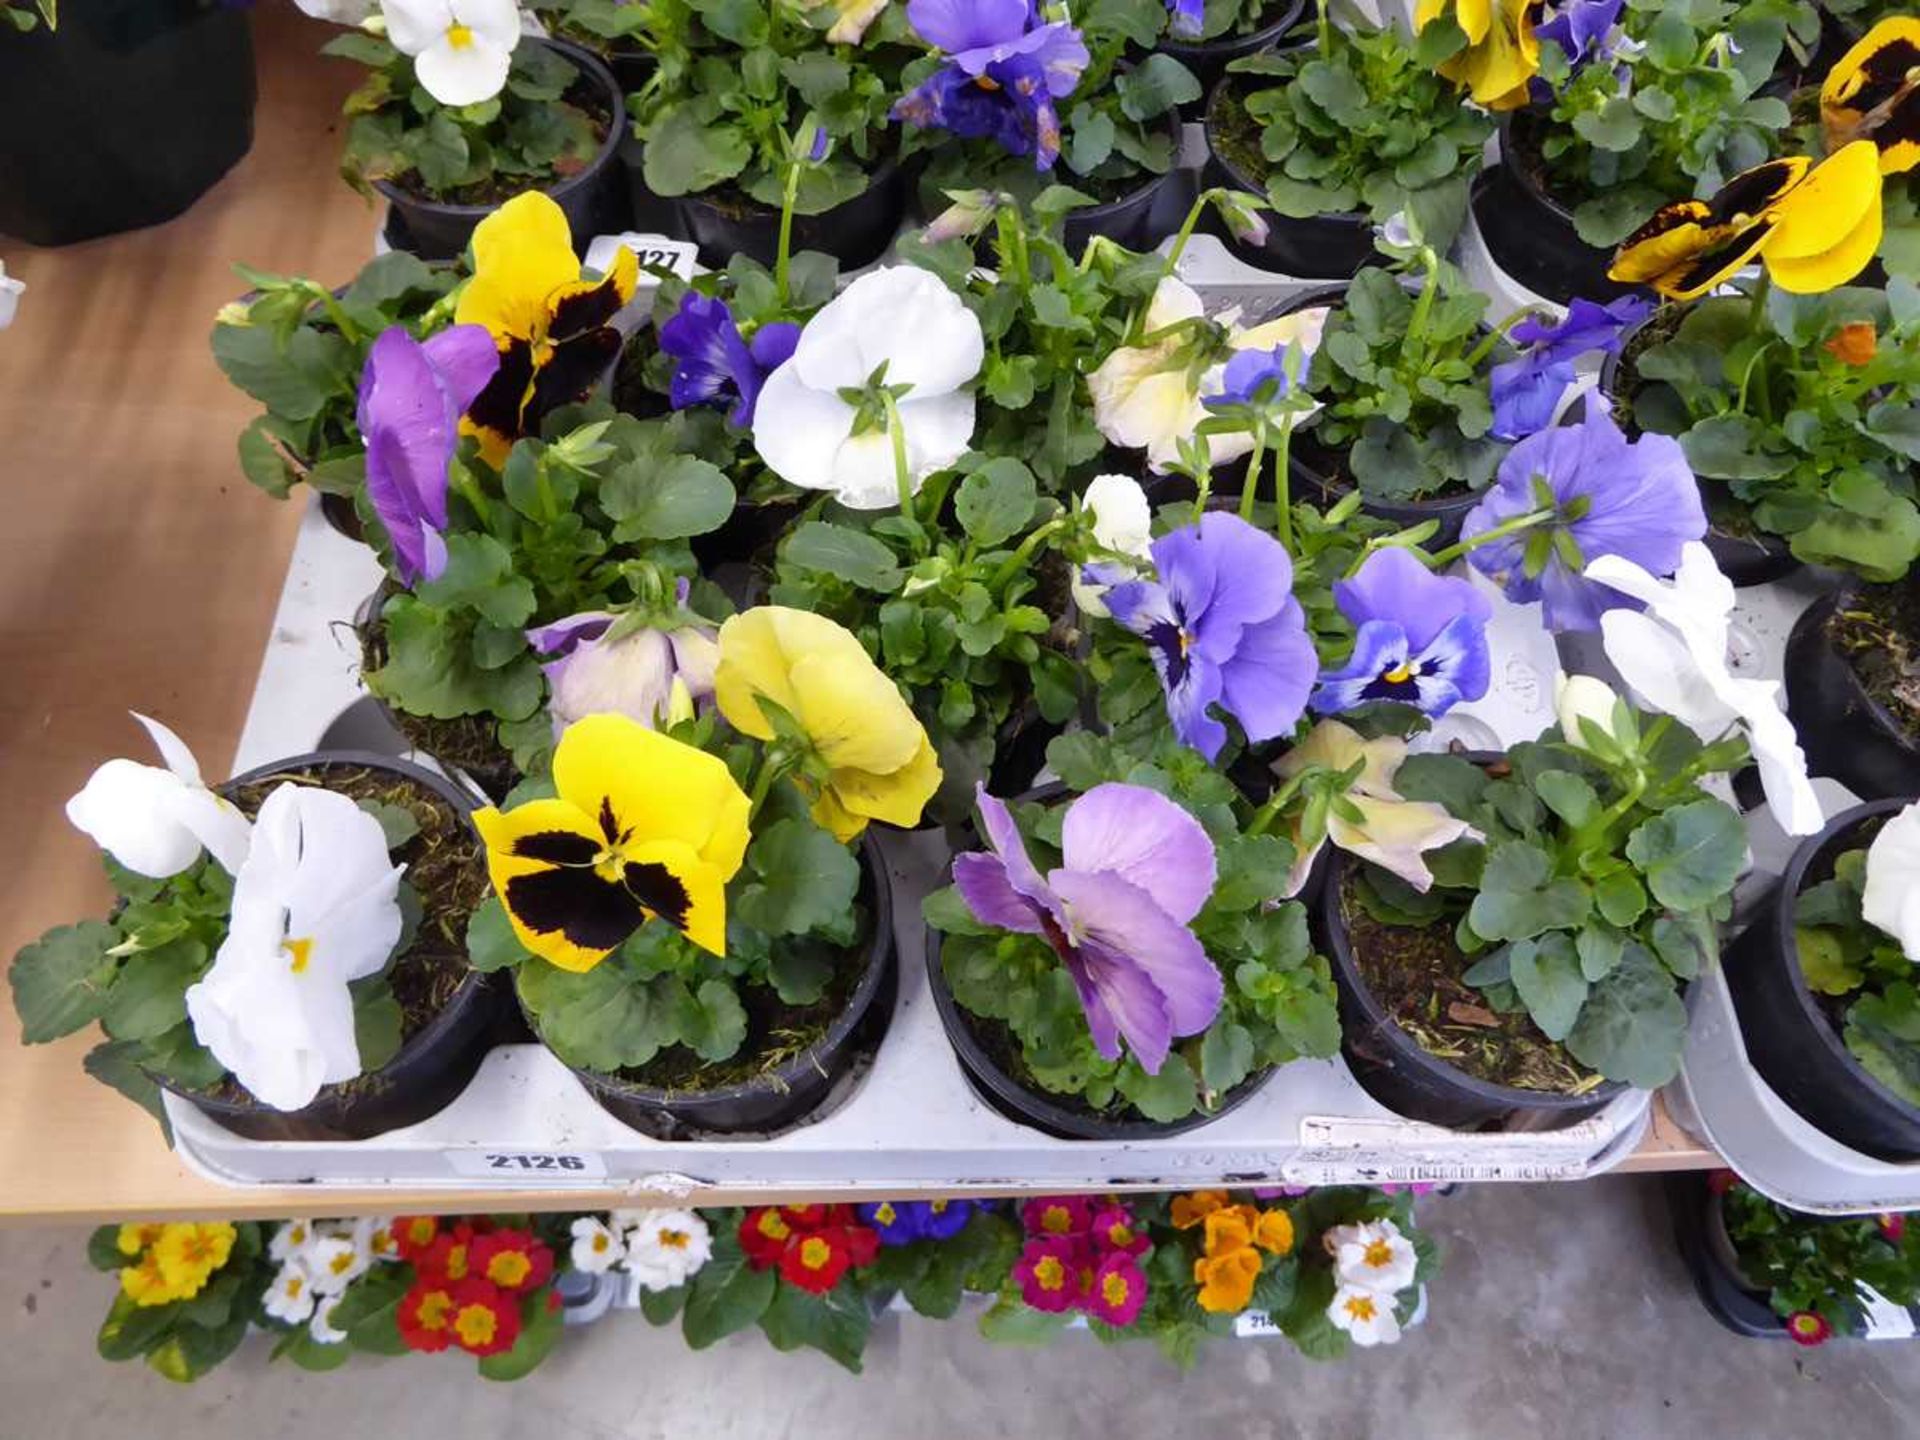 2 trays containing 11 pots of pansies